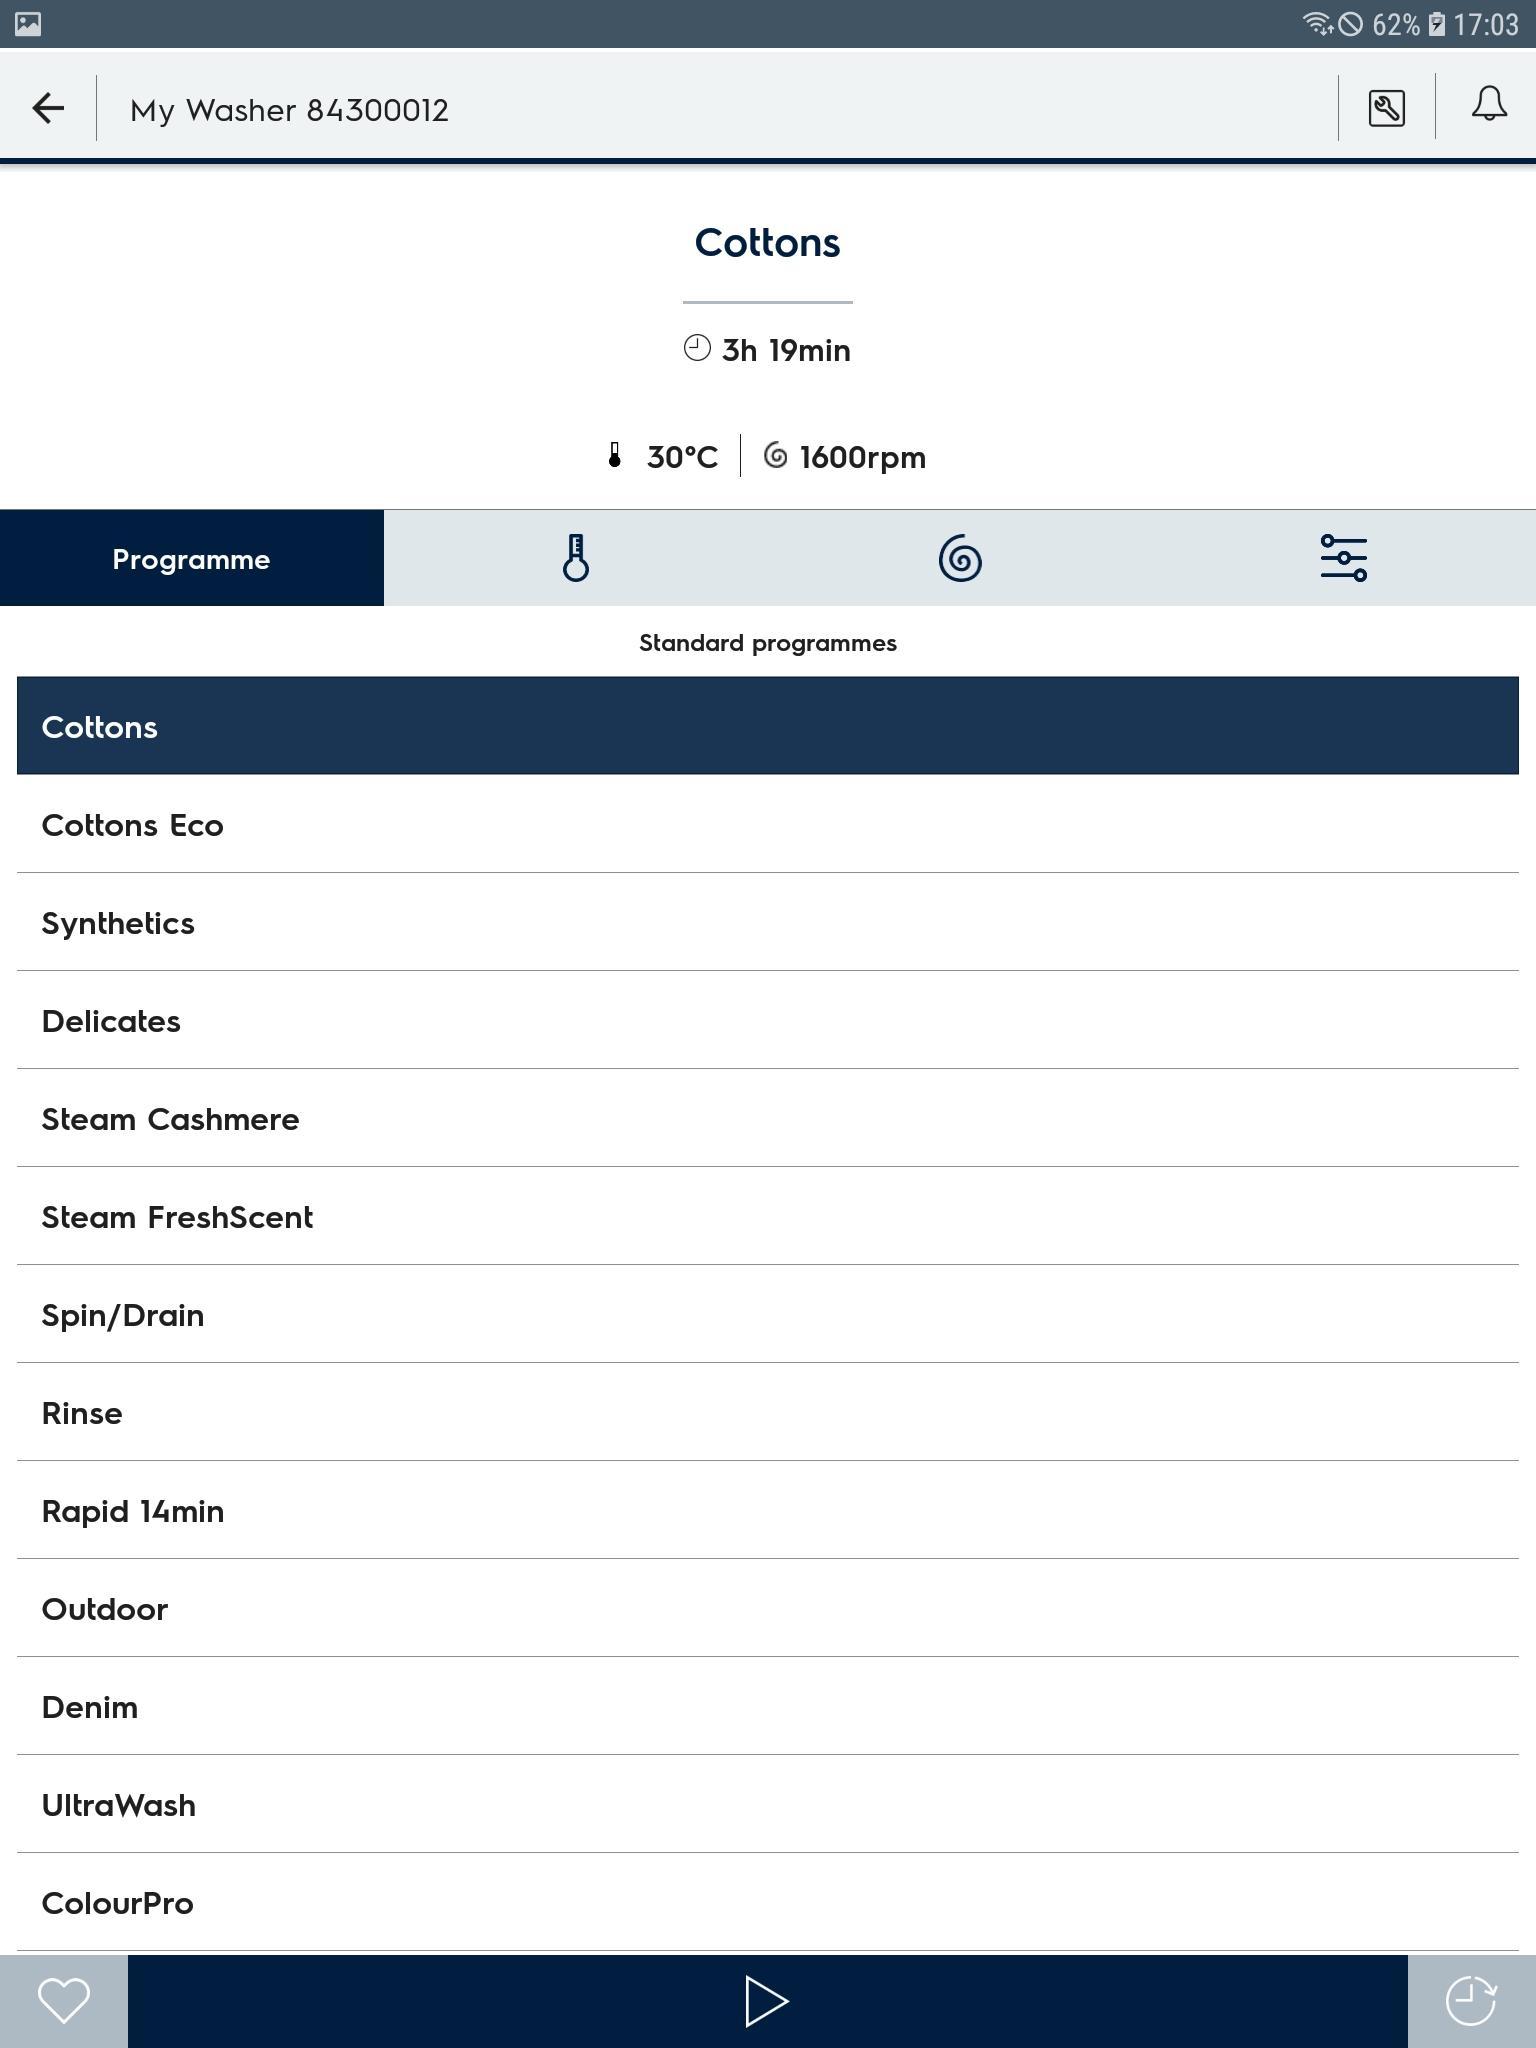 Electrolux Care for Android - APK Download